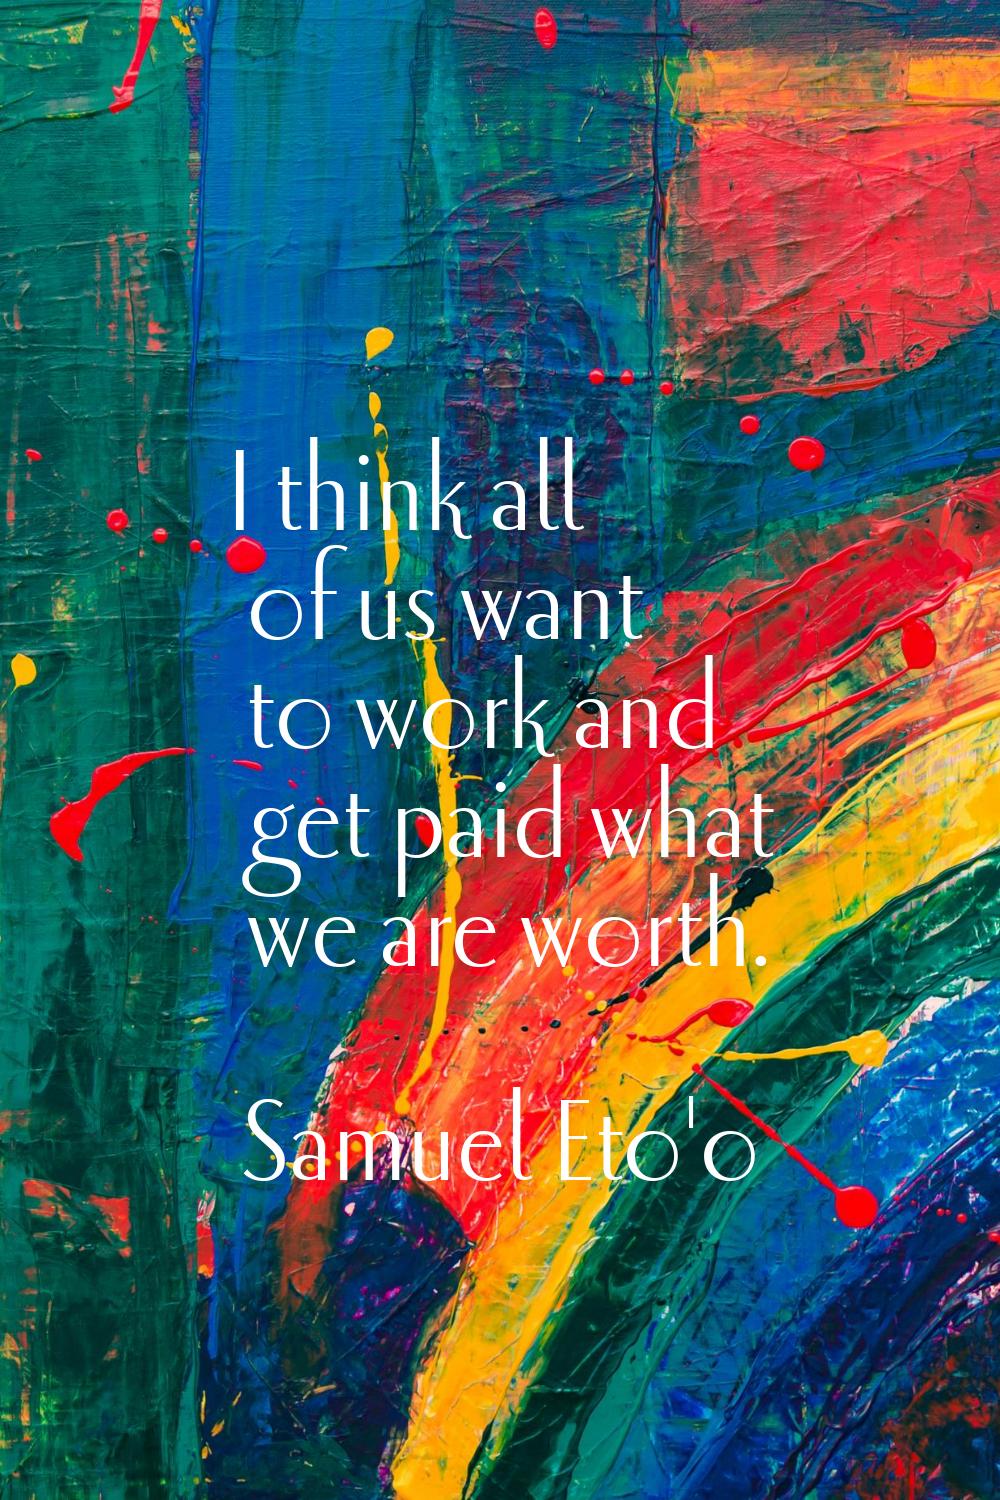 I think all of us want to work and get paid what we are worth.